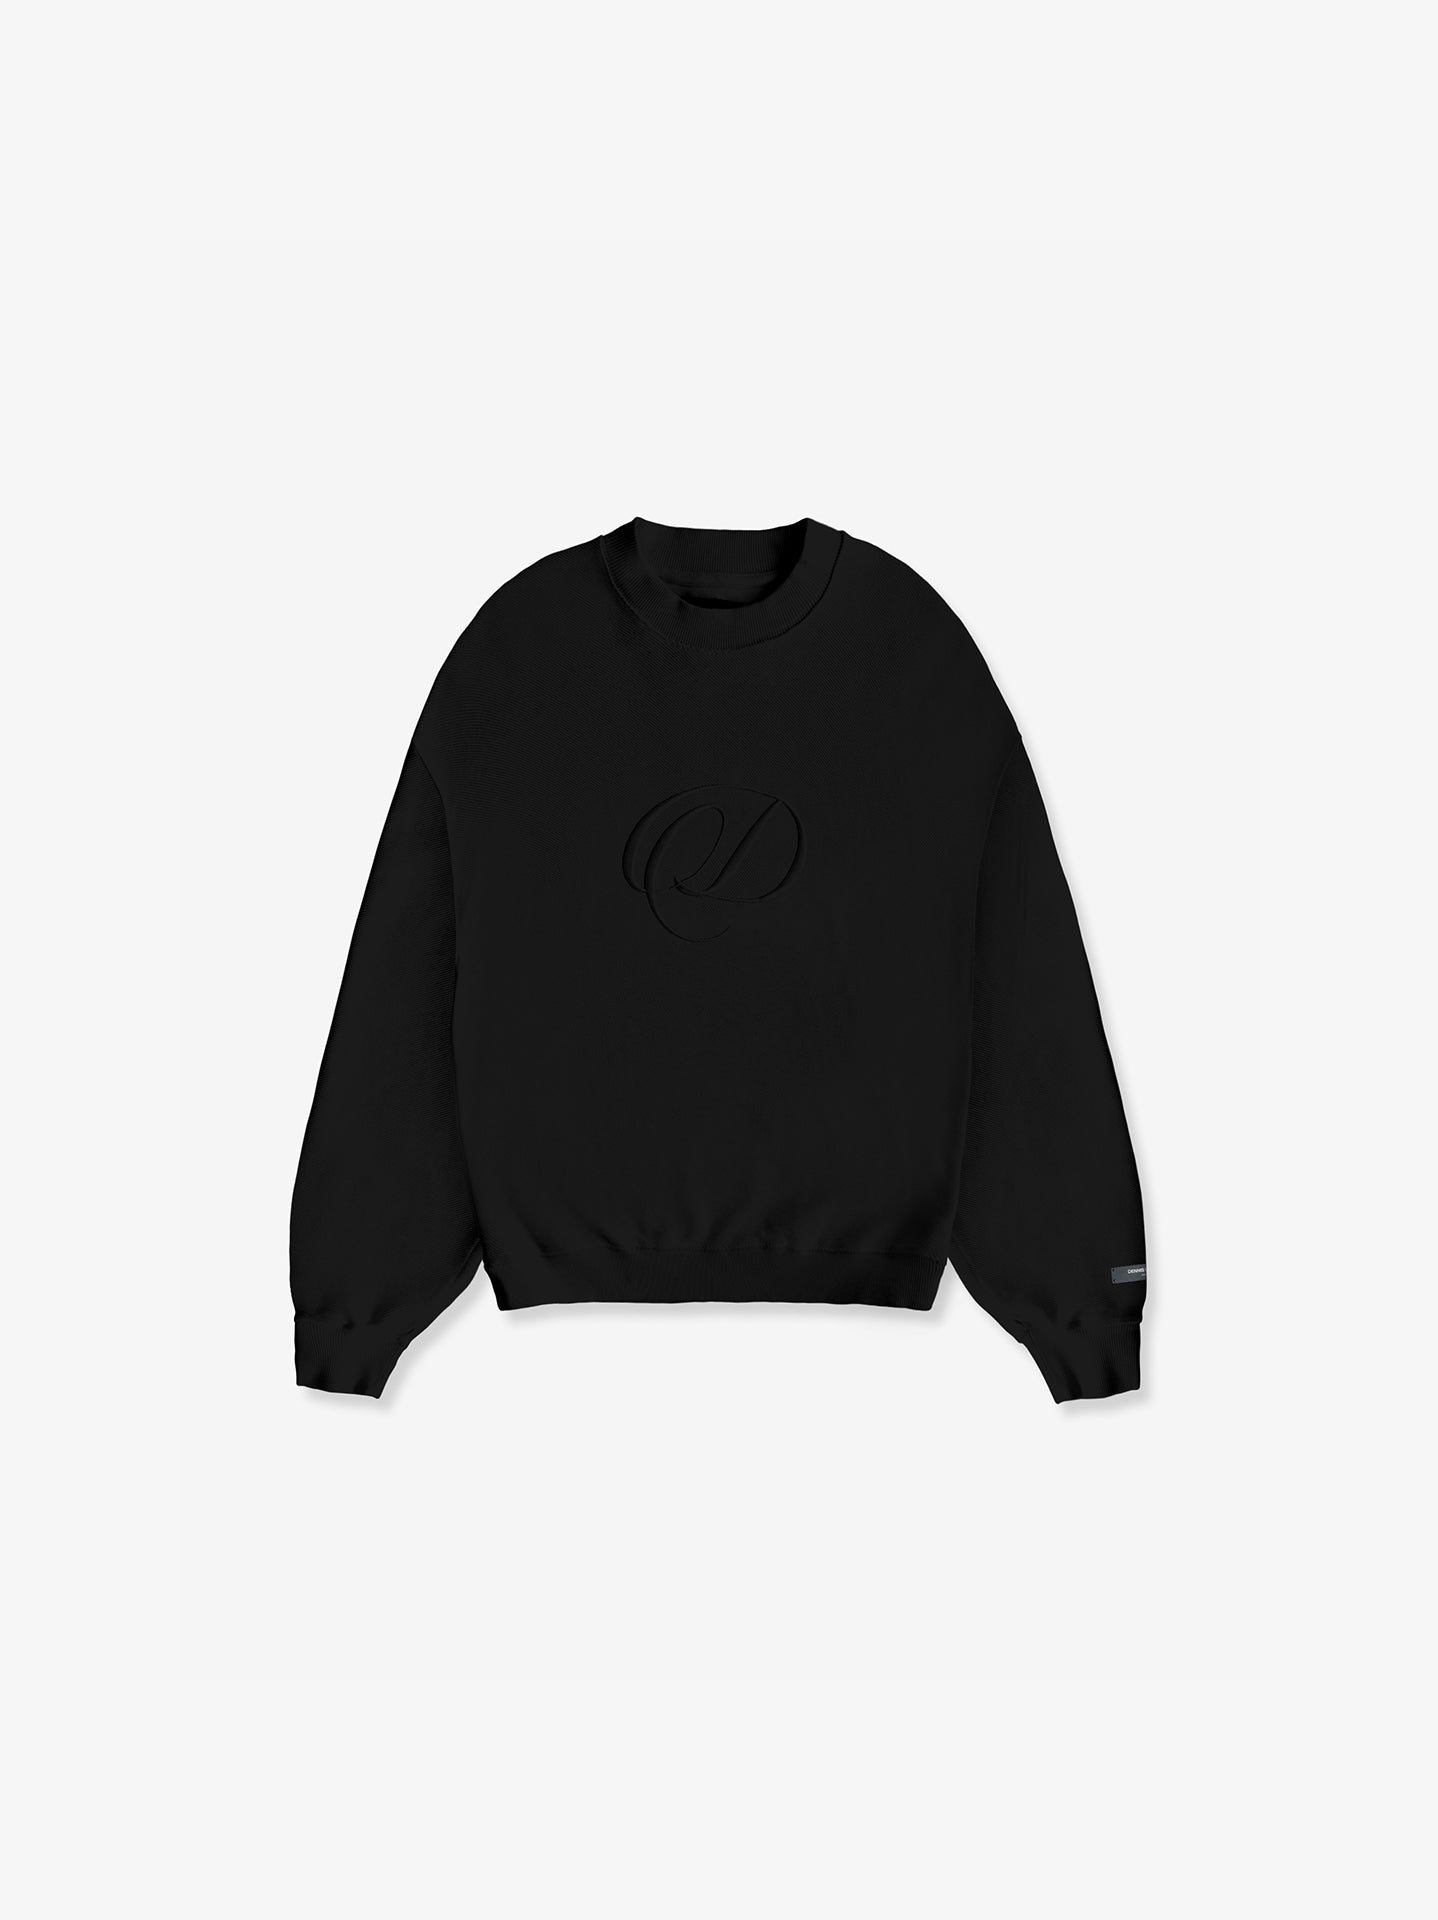 Inside Out Sweater - Black